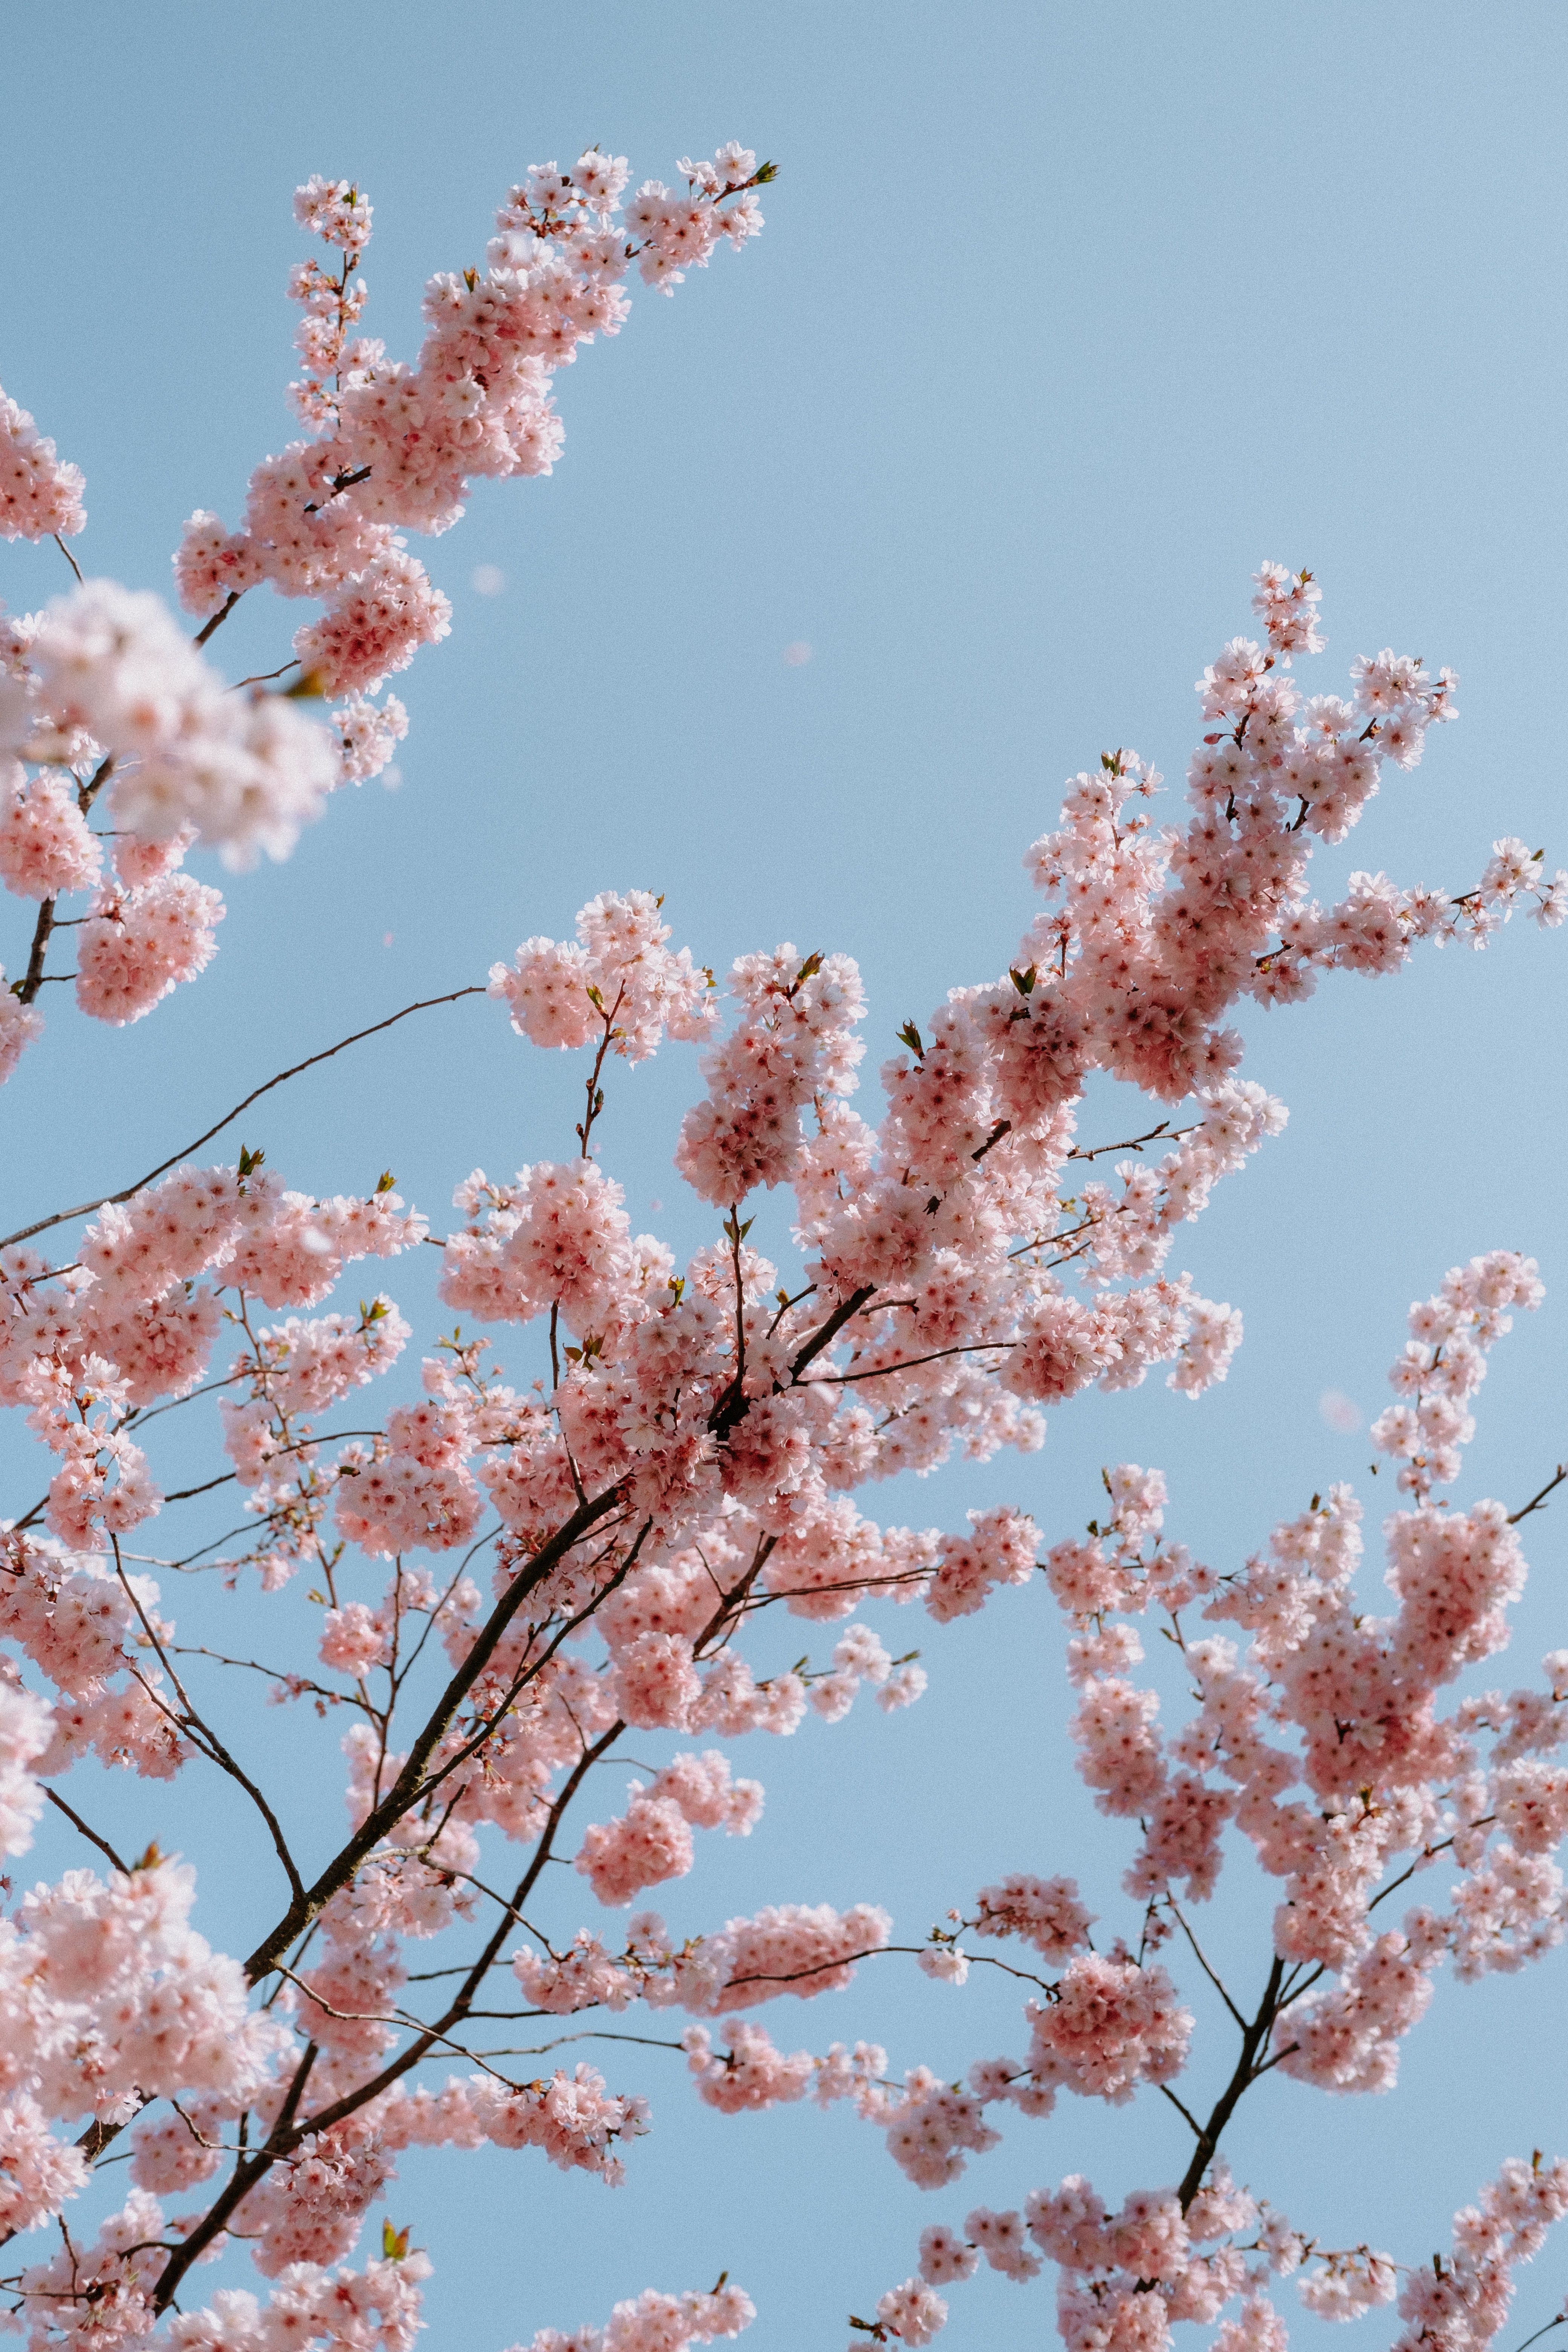 A close up of a tree with pink flowers against a blue sky - Cherry blossom